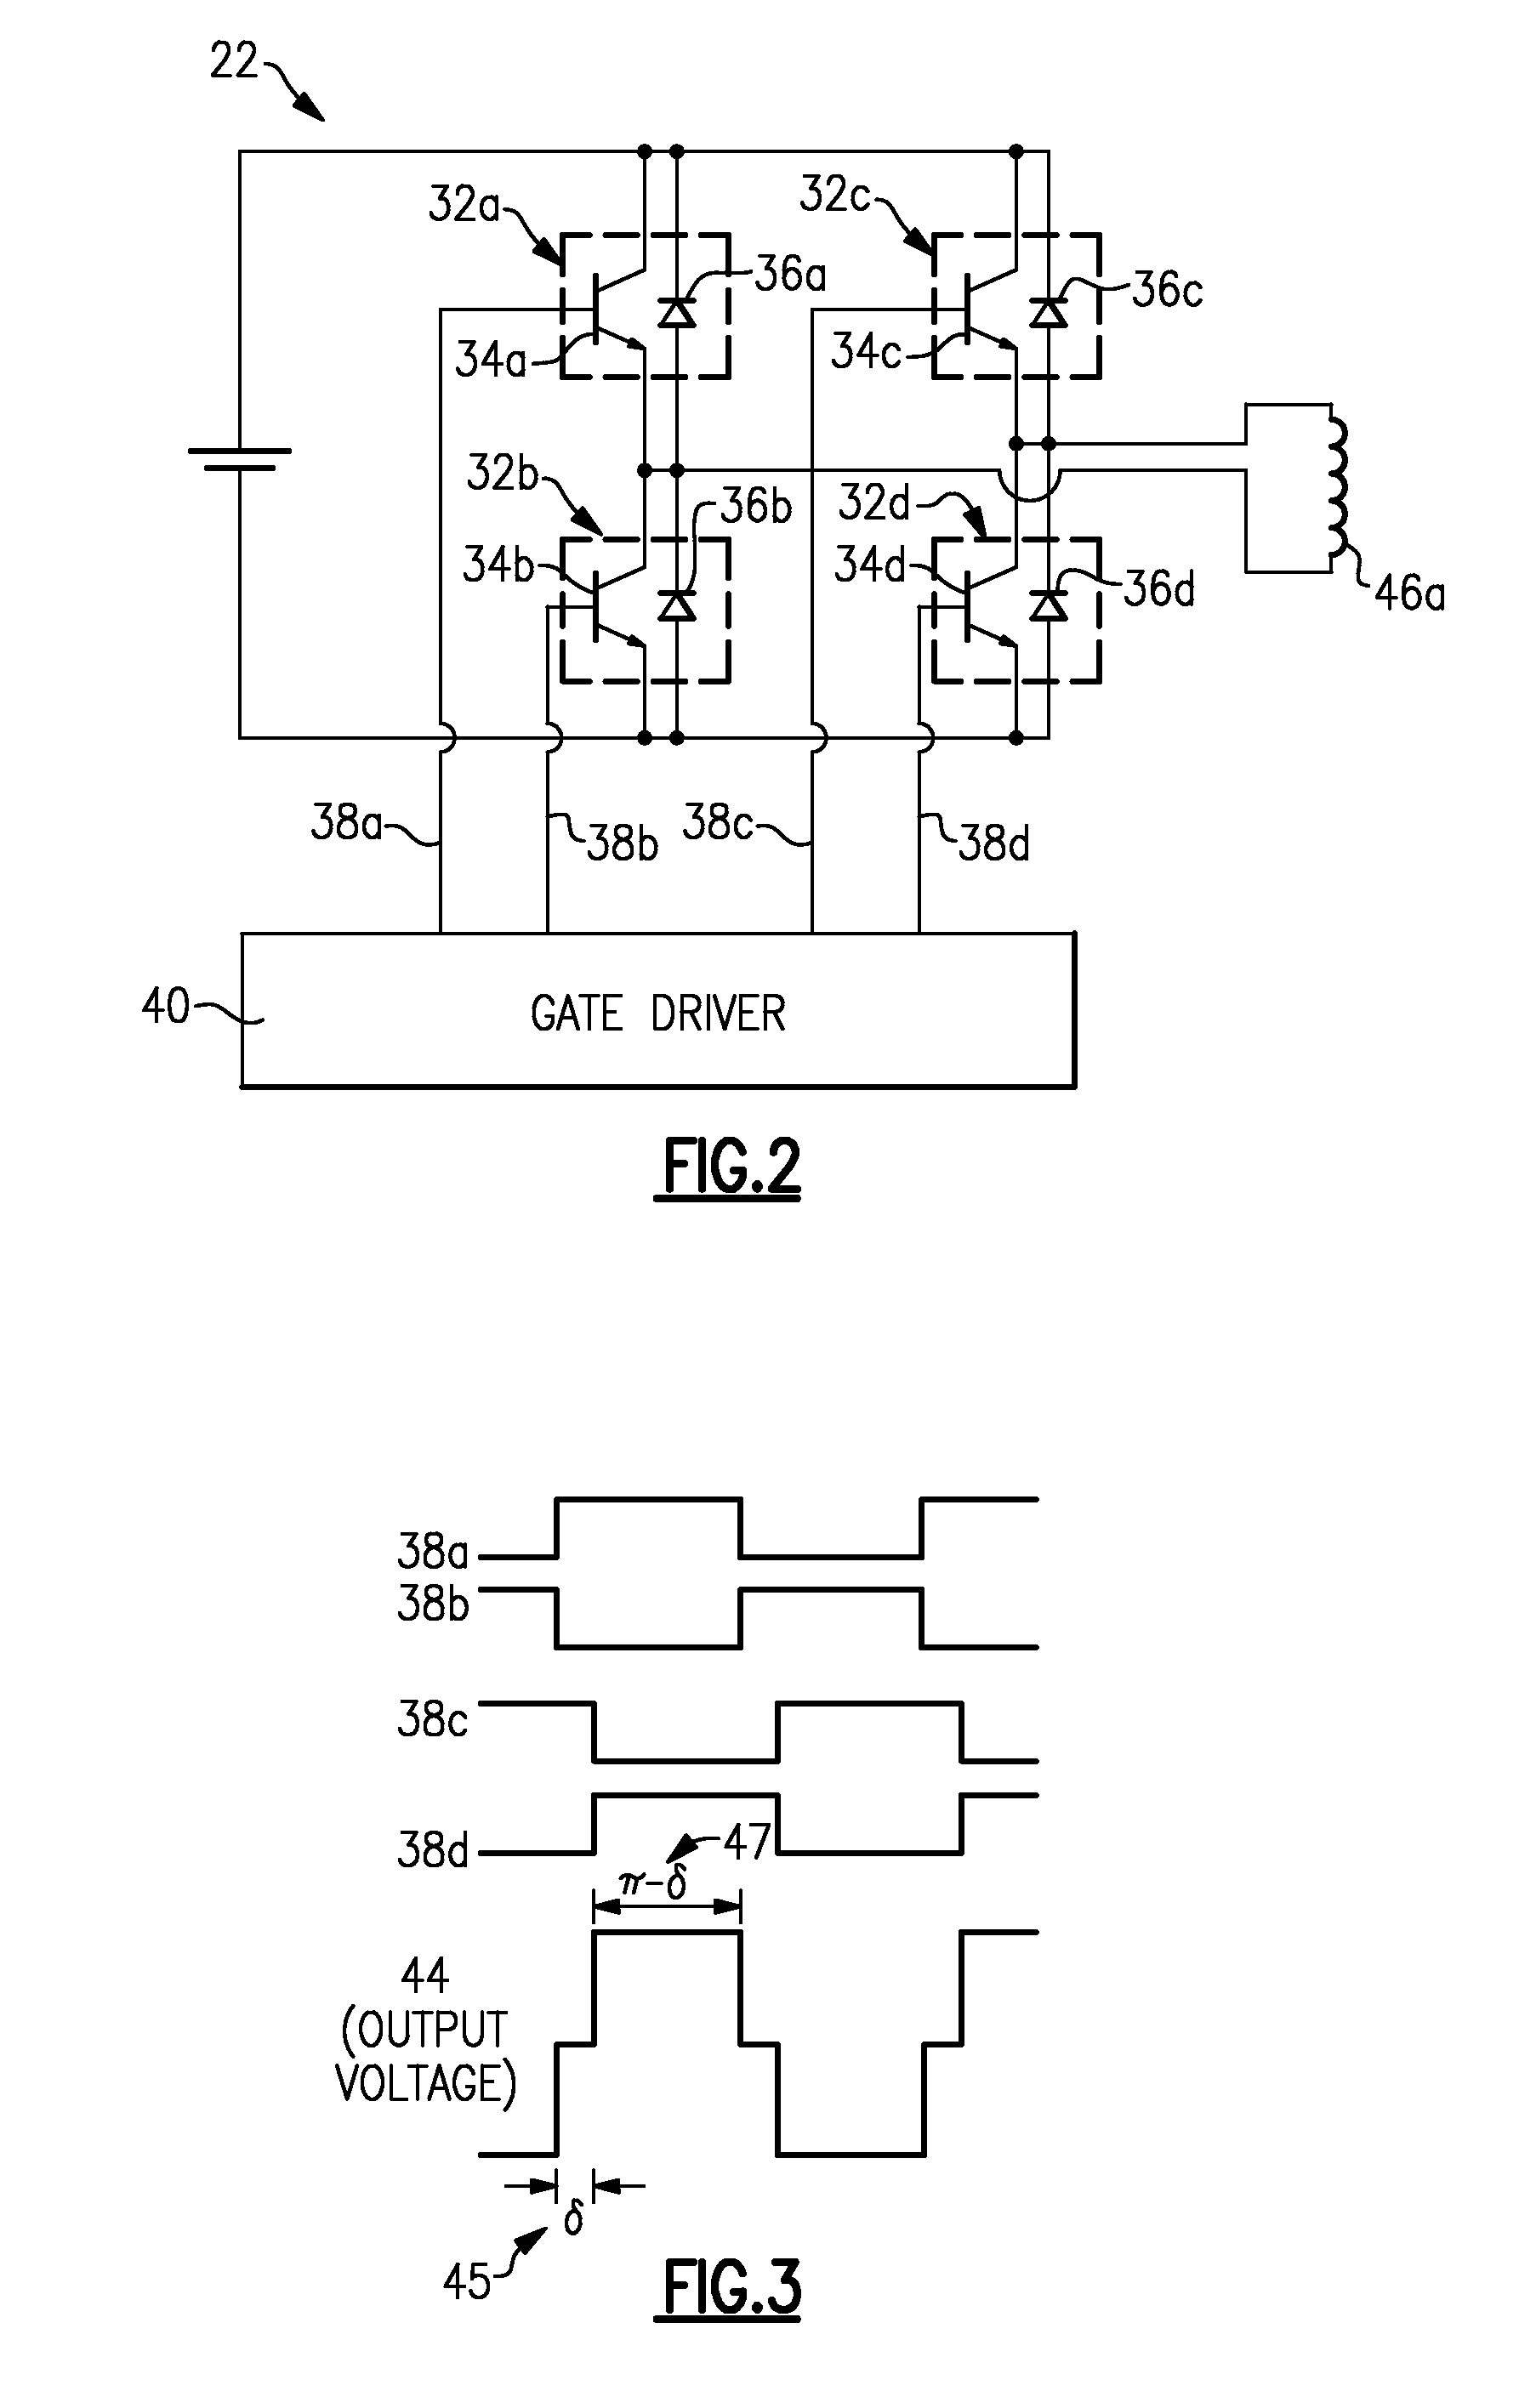 Power-conversion control system including sliding mode controller and cycloconverter